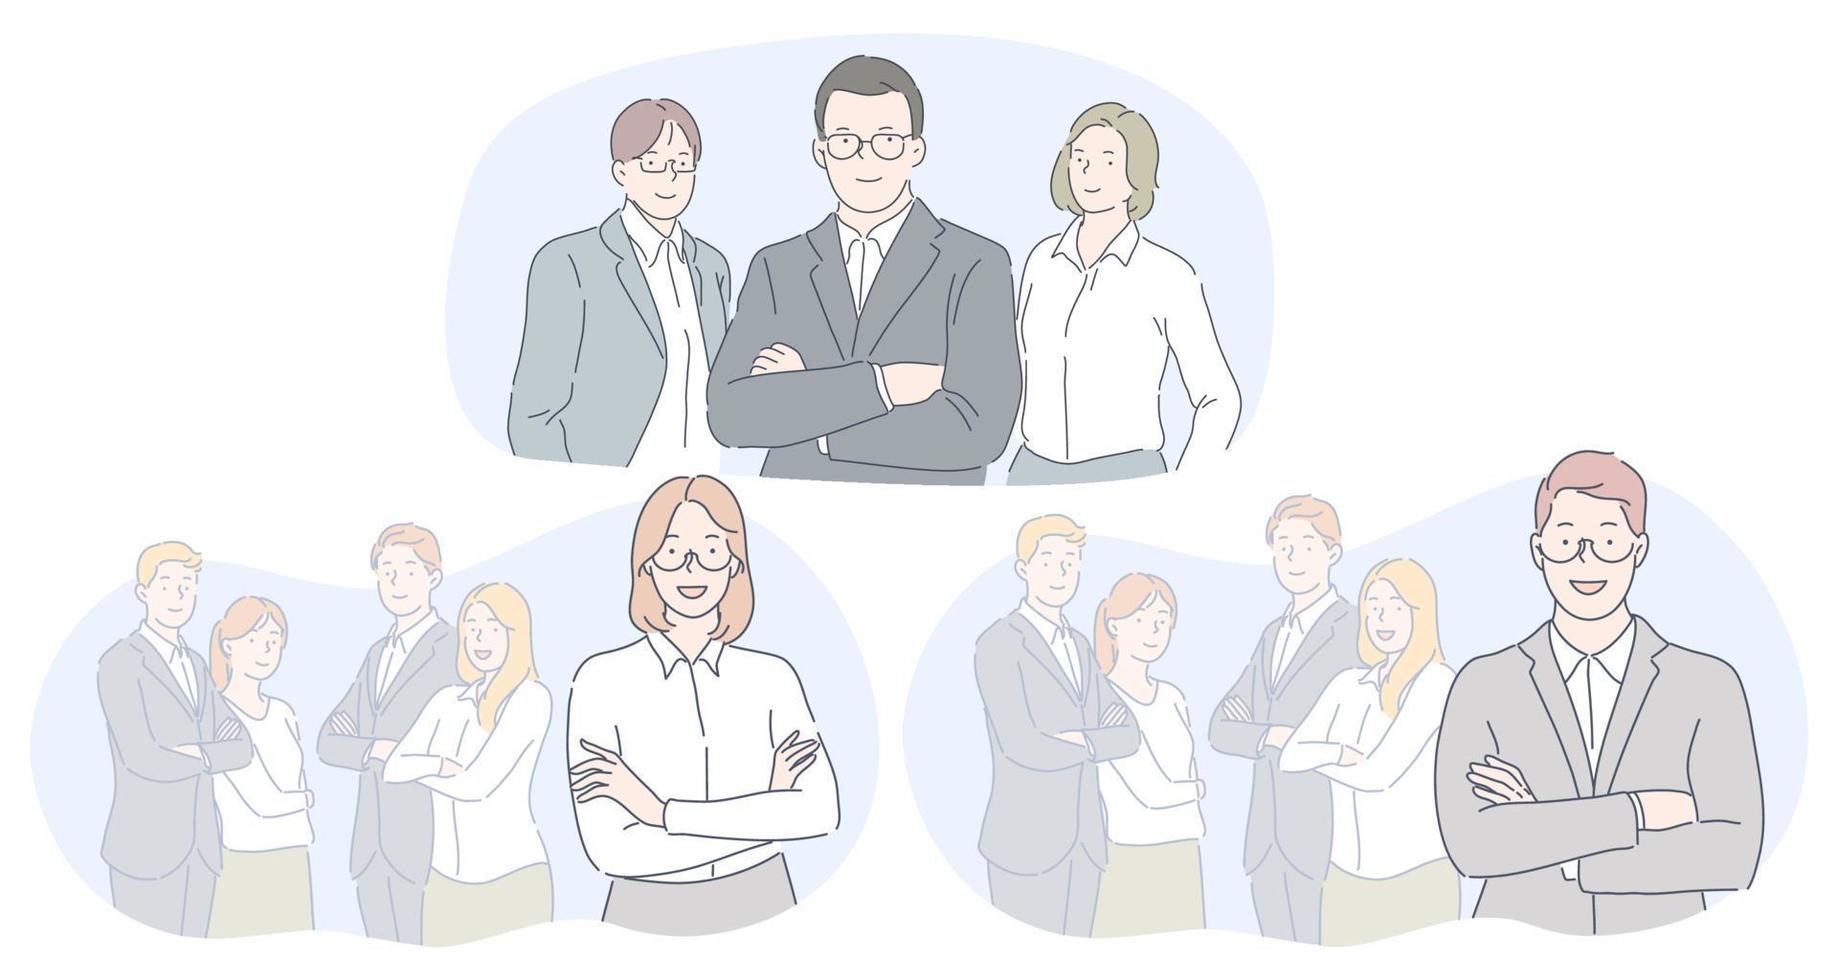 Teamwork, leadership, business concept. Smiling young business people partners office coworkers standing in teams and looking at camera in official clothing together vector illustration